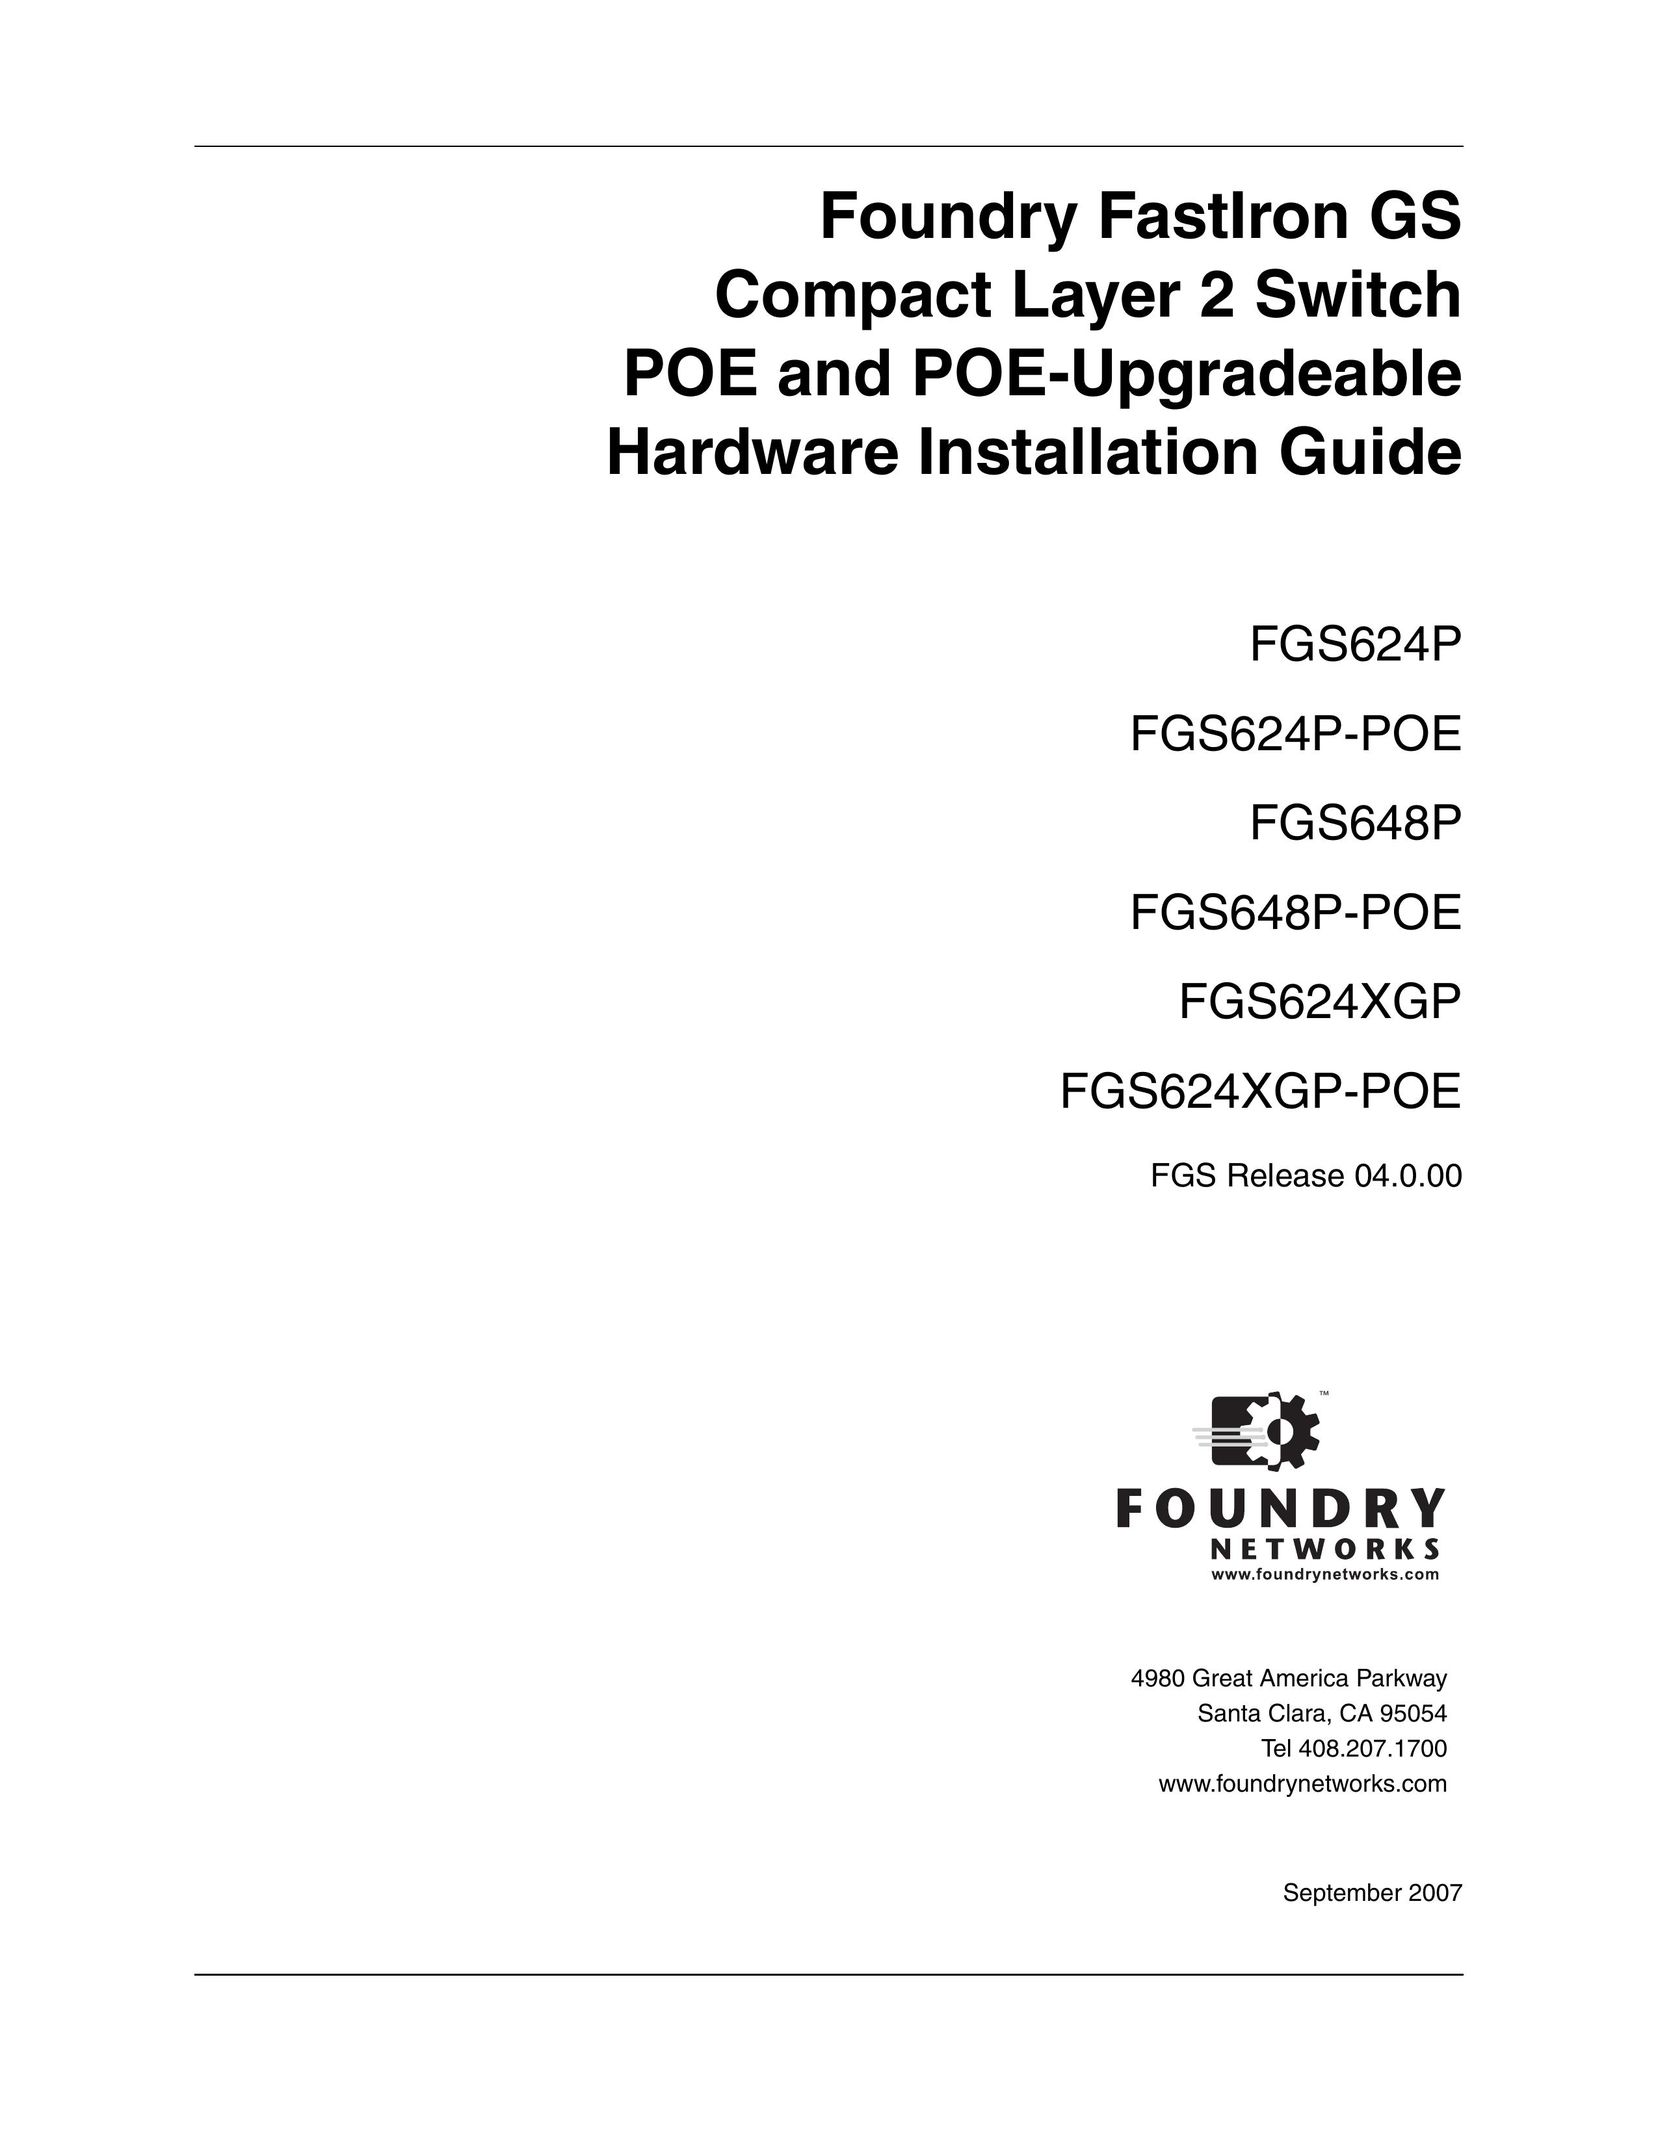 Foundry Networks FGS624P-POE Network Hardware User Manual